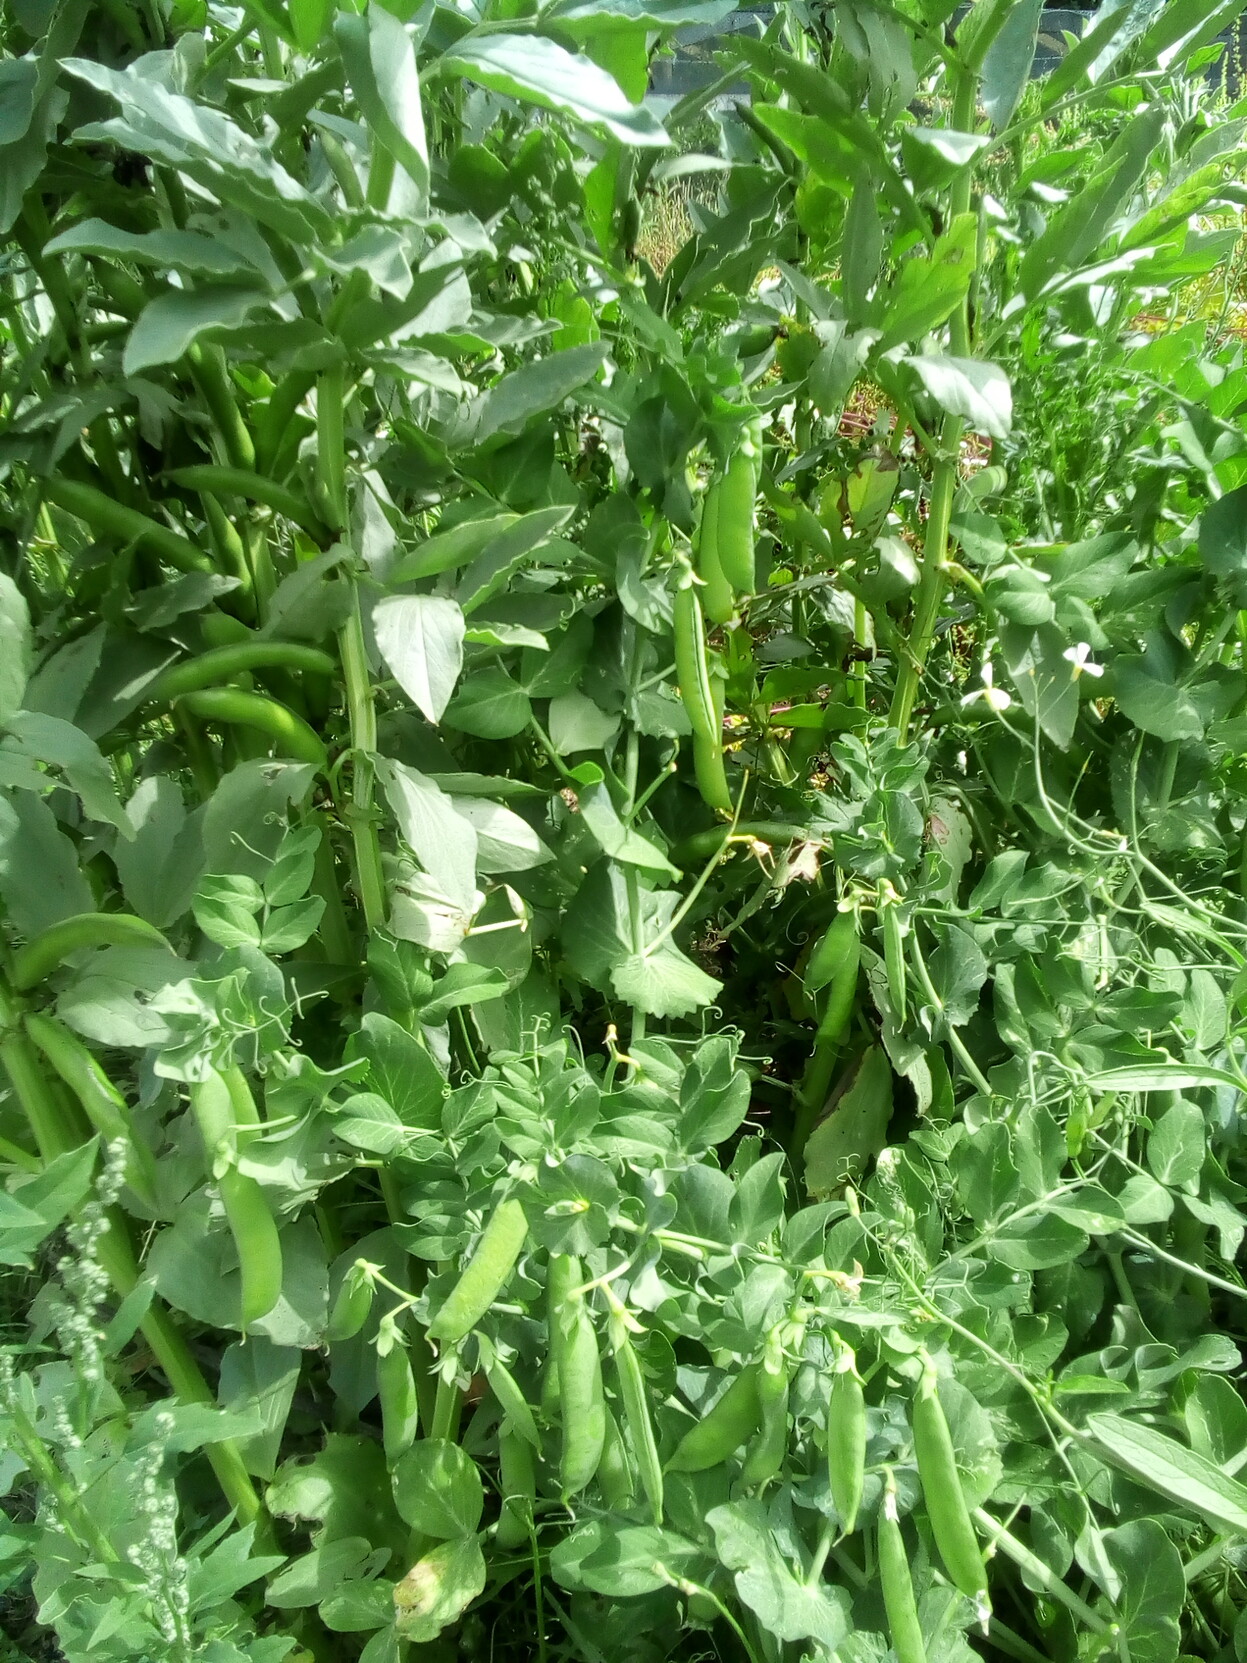 Peas plants in fruit in front of broadbean stalks also with pods.